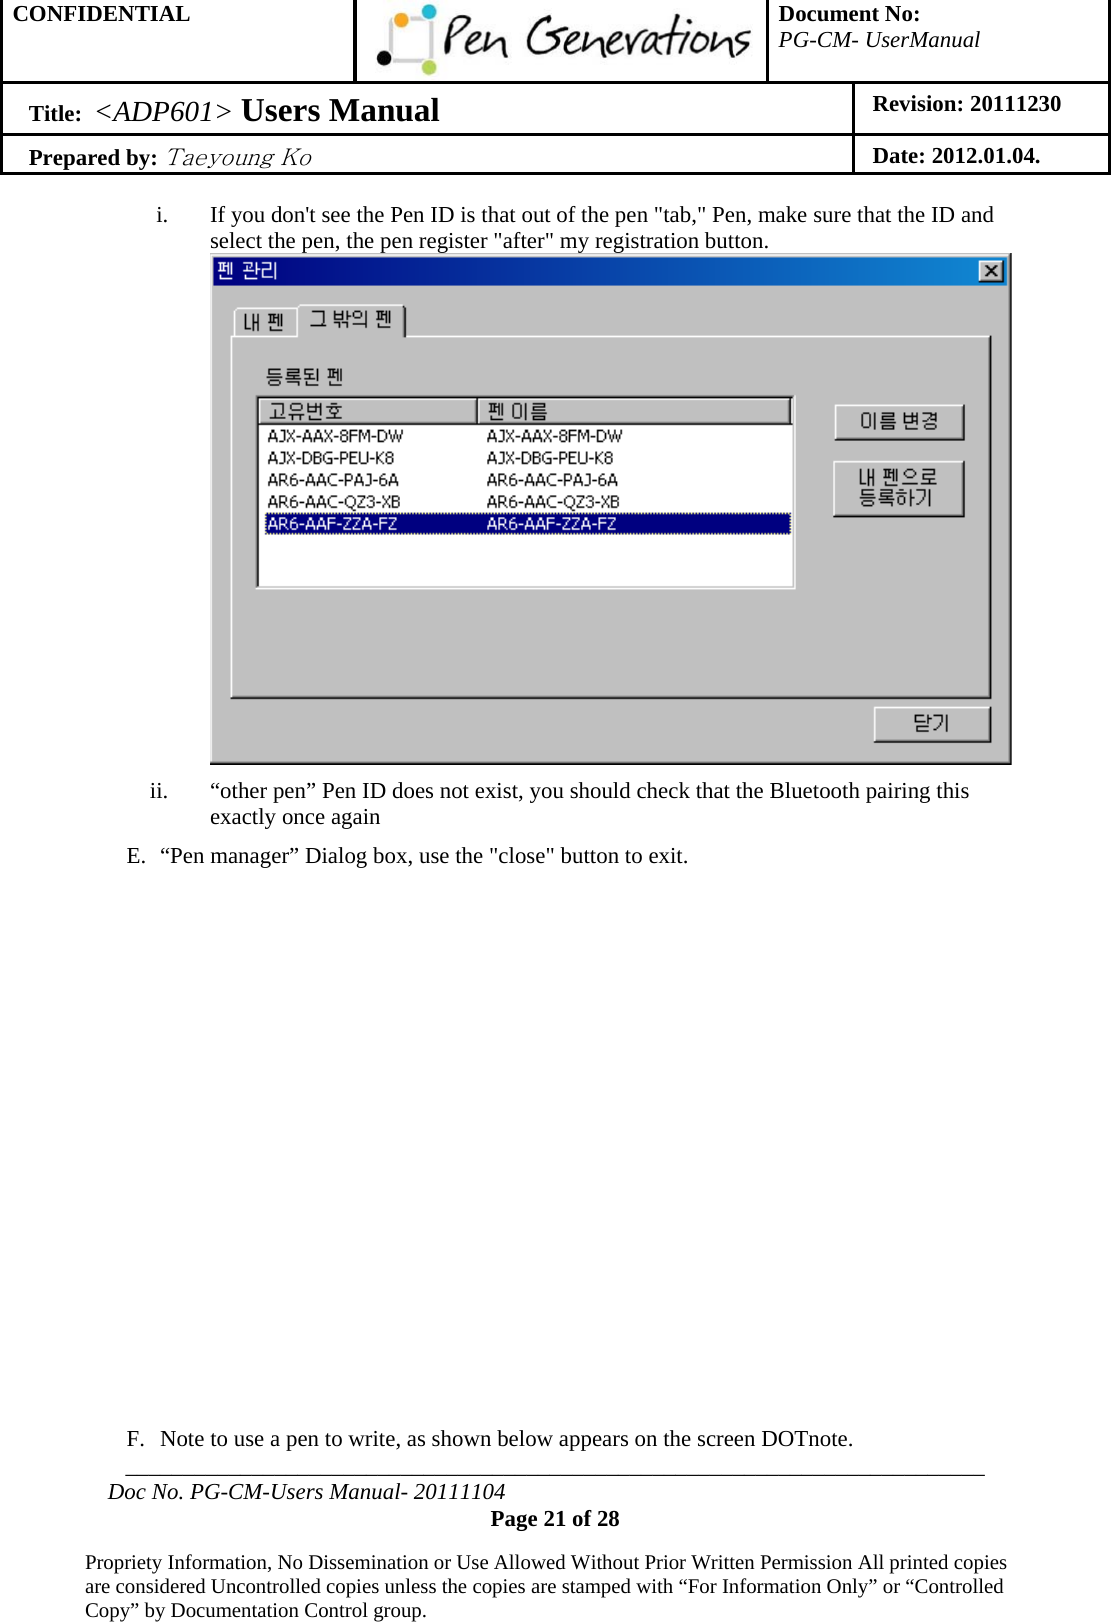 CONFIDENTIAL  Document No: PG-CM- UserManual Title:  &lt;ADP601&gt; Users Manual   Revision: 20111230 Prepared by: Taeyoung Ko Date: 2012.01.04.  ___________________________________________________________________________ Doc No. PG-CM-Users Manual- 20111104 Page 21 of 28  Propriety Information, No Dissemination or Use Allowed Without Prior Written Permission All printed copies are considered Uncontrolled copies unless the copies are stamped with “For Information Only” or “Controlled Copy” by Documentation Control group.  i. If you don&apos;t see the Pen ID is that out of the pen &quot;tab,&quot; Pen, make sure that the ID and select the pen, the pen register &quot;after&quot; my registration button.  ii. “other pen” Pen ID does not exist, you should check that the Bluetooth pairing this exactly once again E. “Pen manager” Dialog box, use the &quot;close&quot; button to exit.               F. Note to use a pen to write, as shown below appears on the screen DOTnote. 